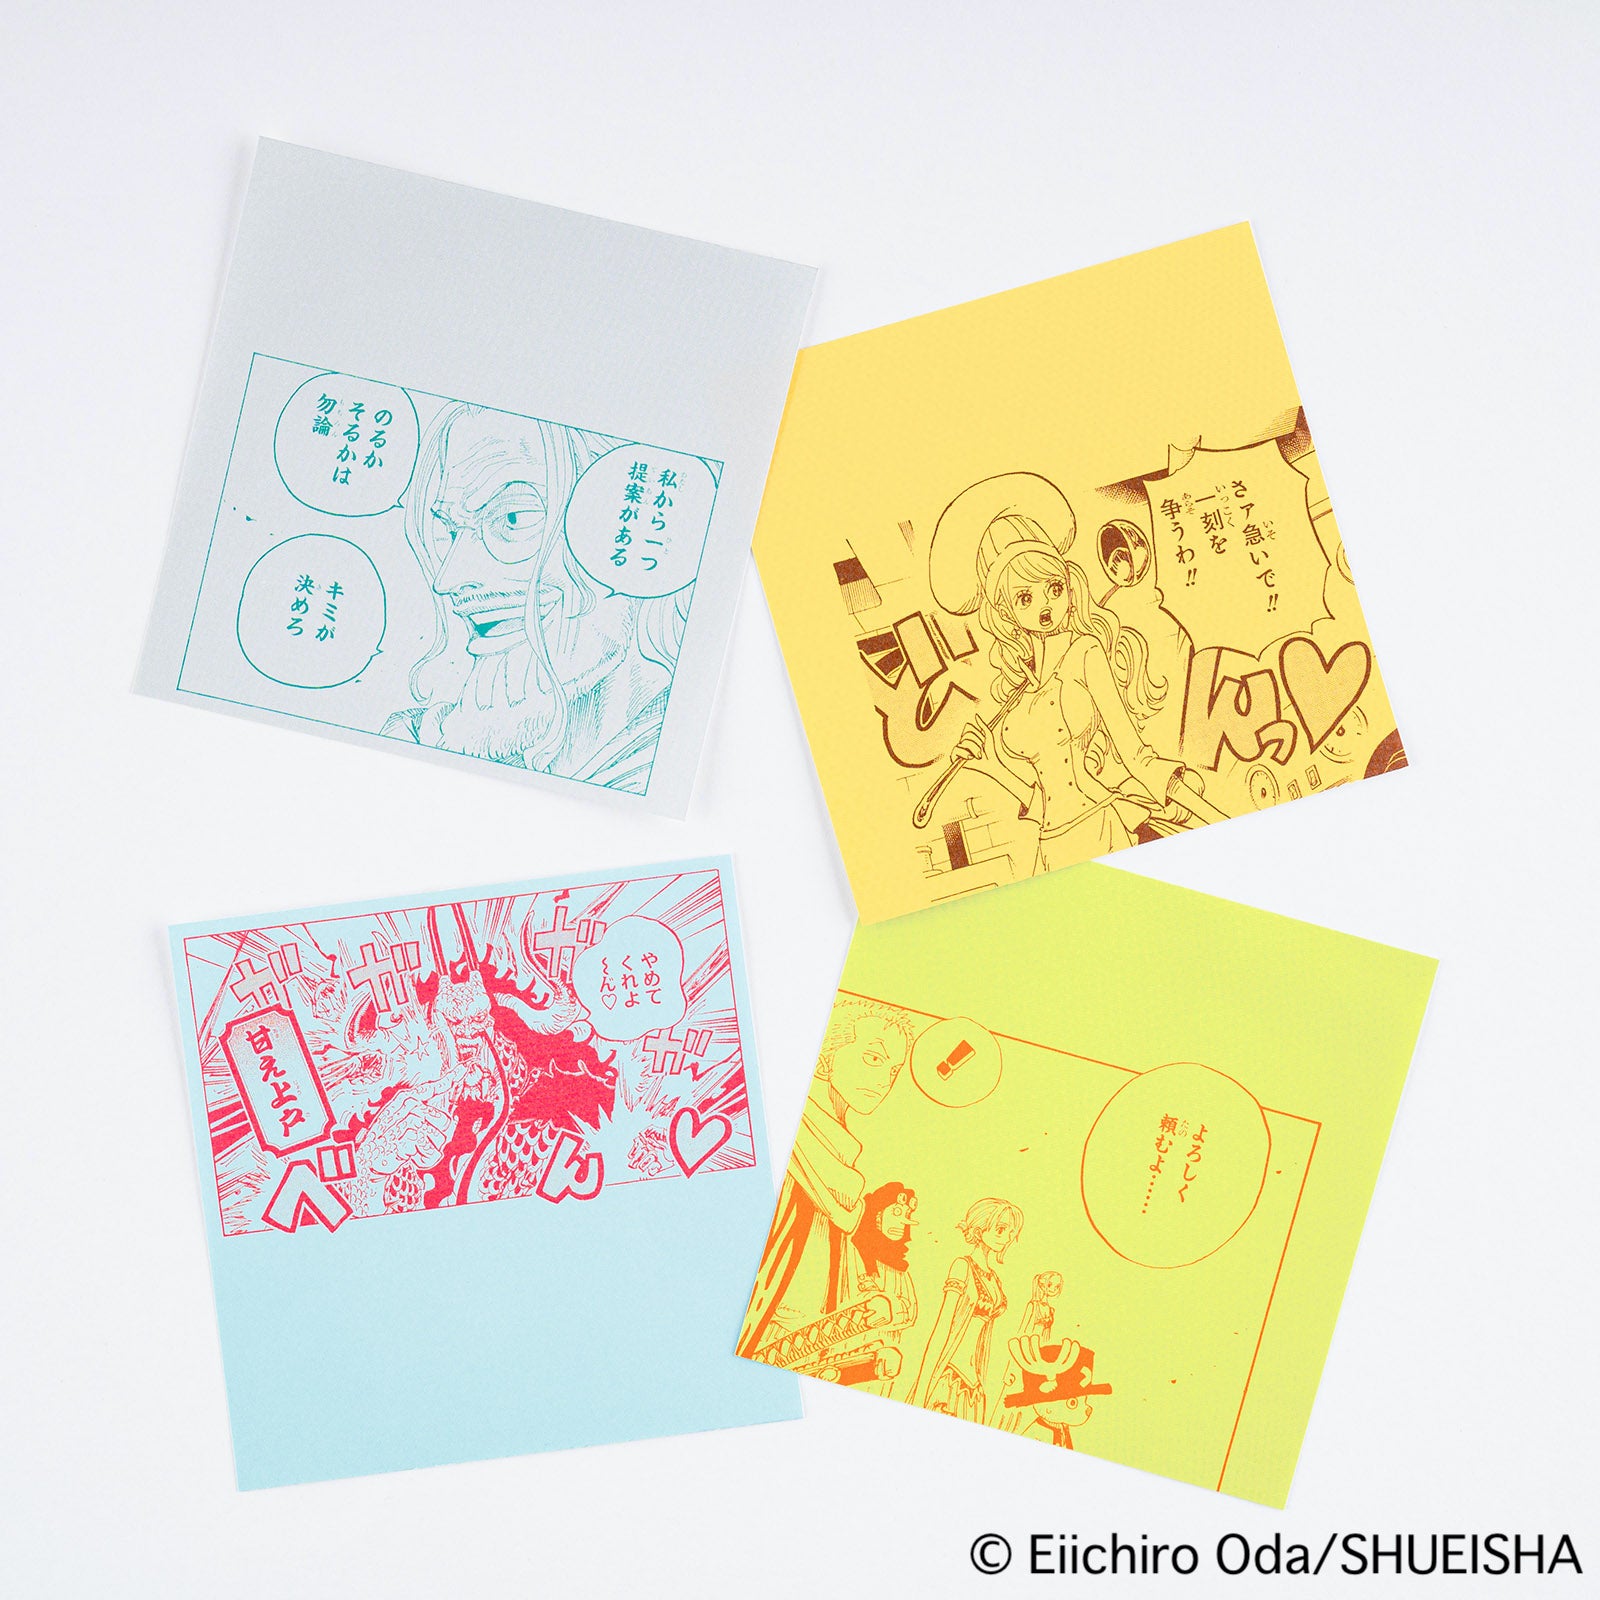 Hobonichi ONE PIECE magazine: Square Letter Paper to Share Your Feelings Vol.2